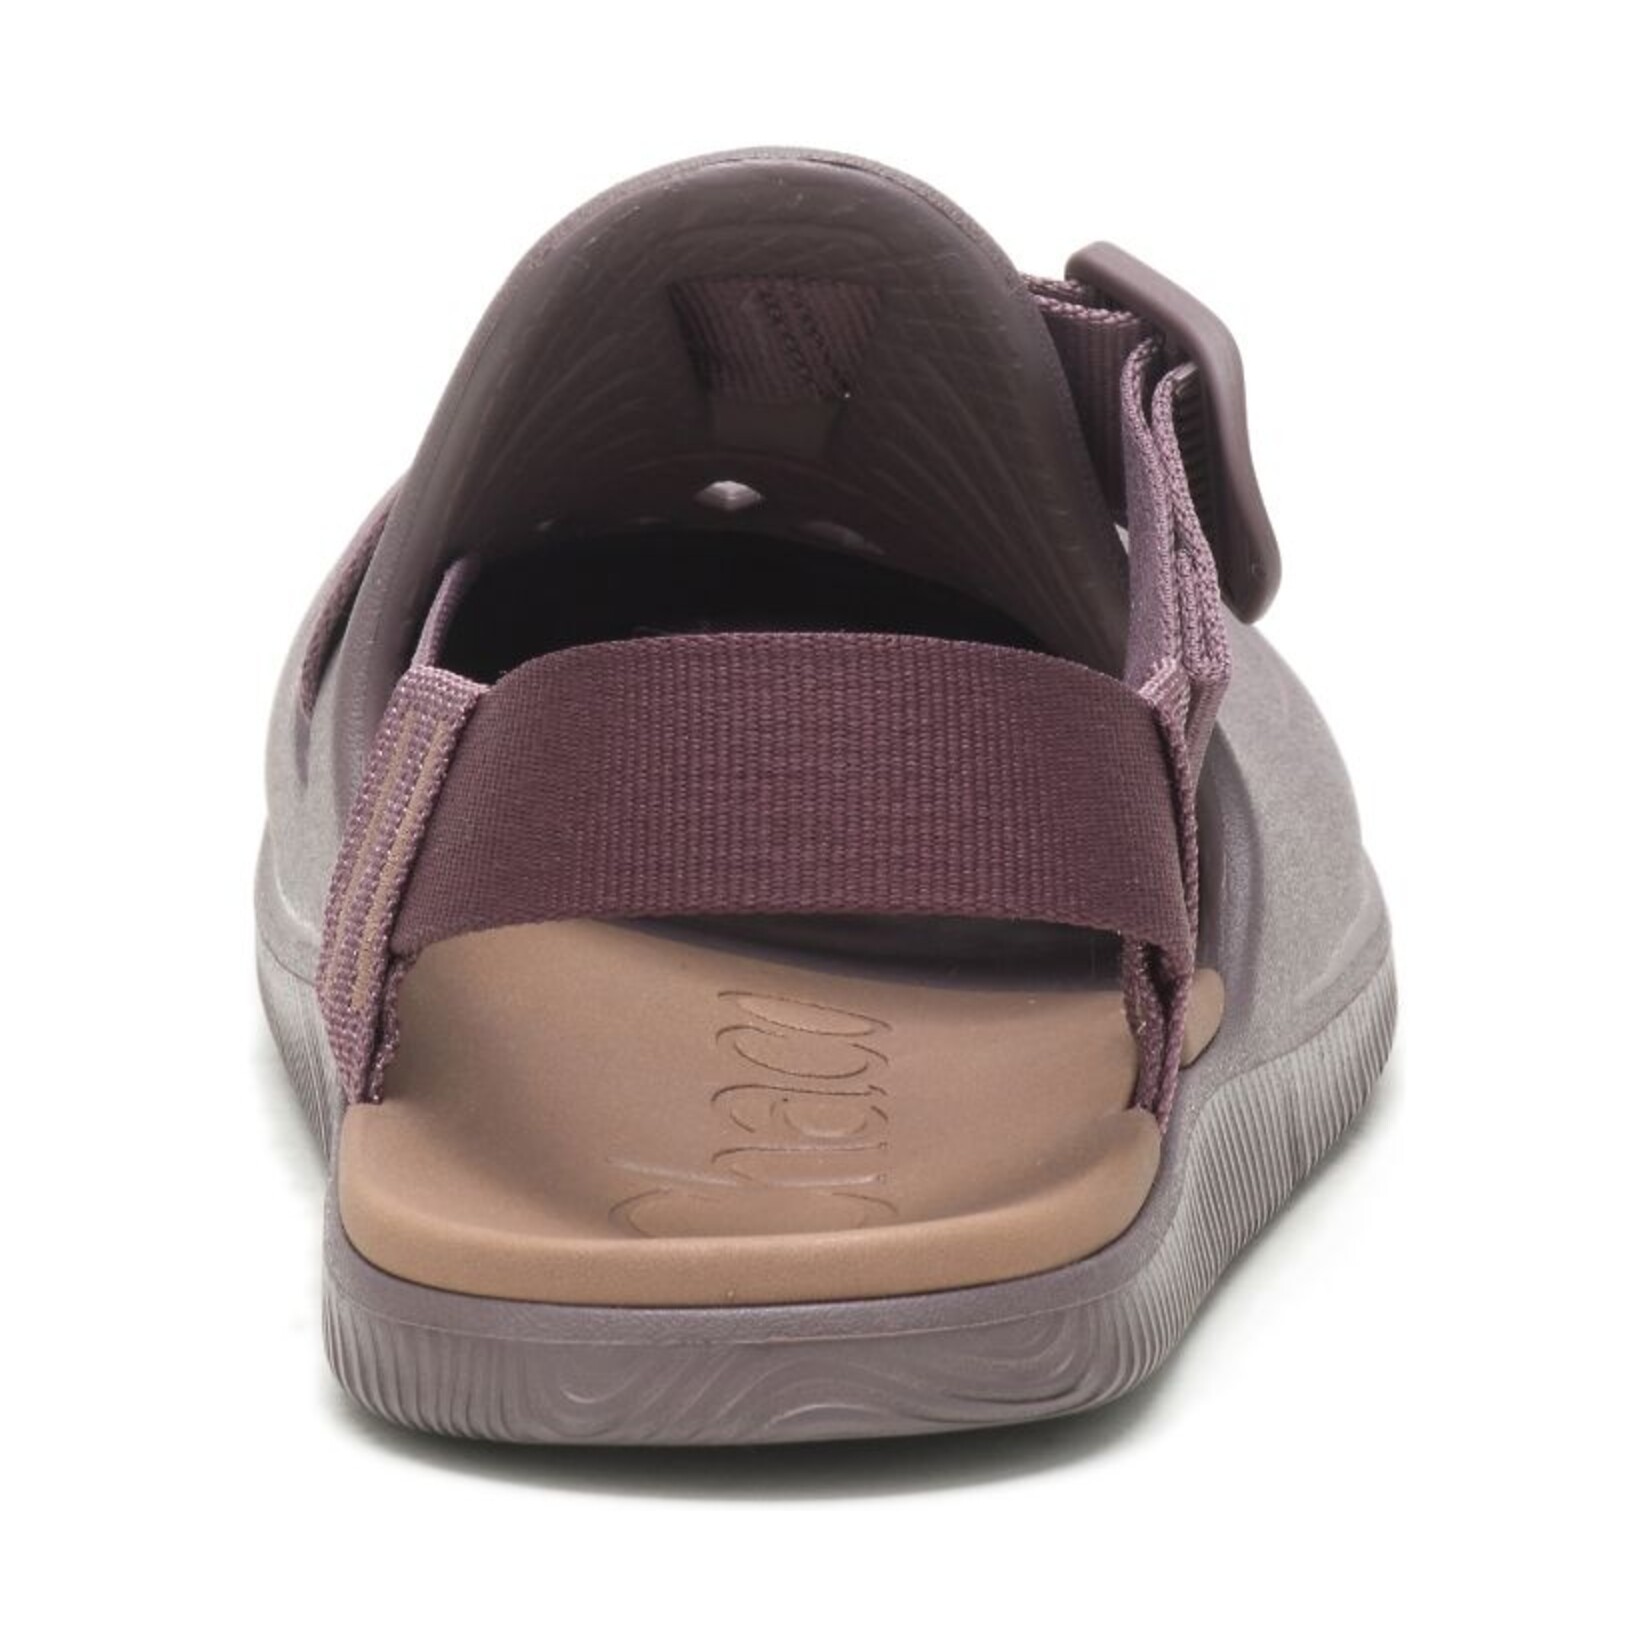 Chaco Chaco Women's Chillos Clog - Closeout